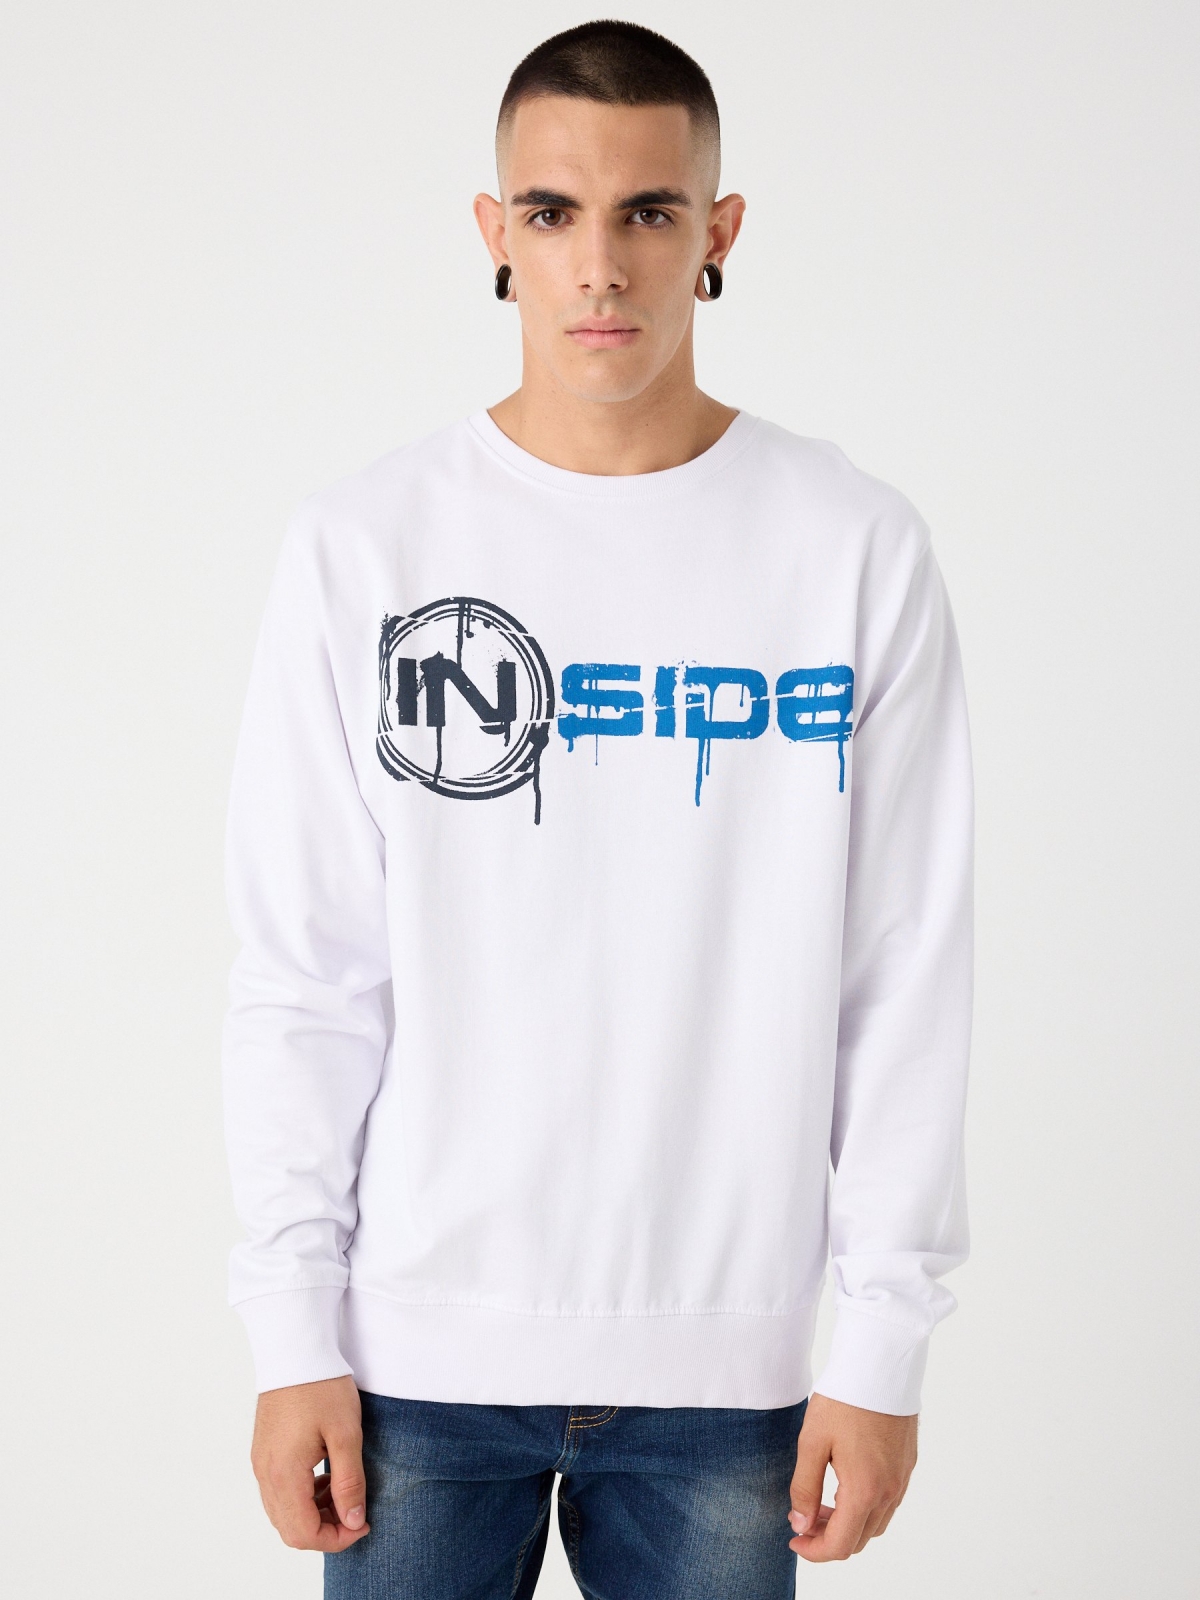 Hoodless sweatshirt with logo white middle front view